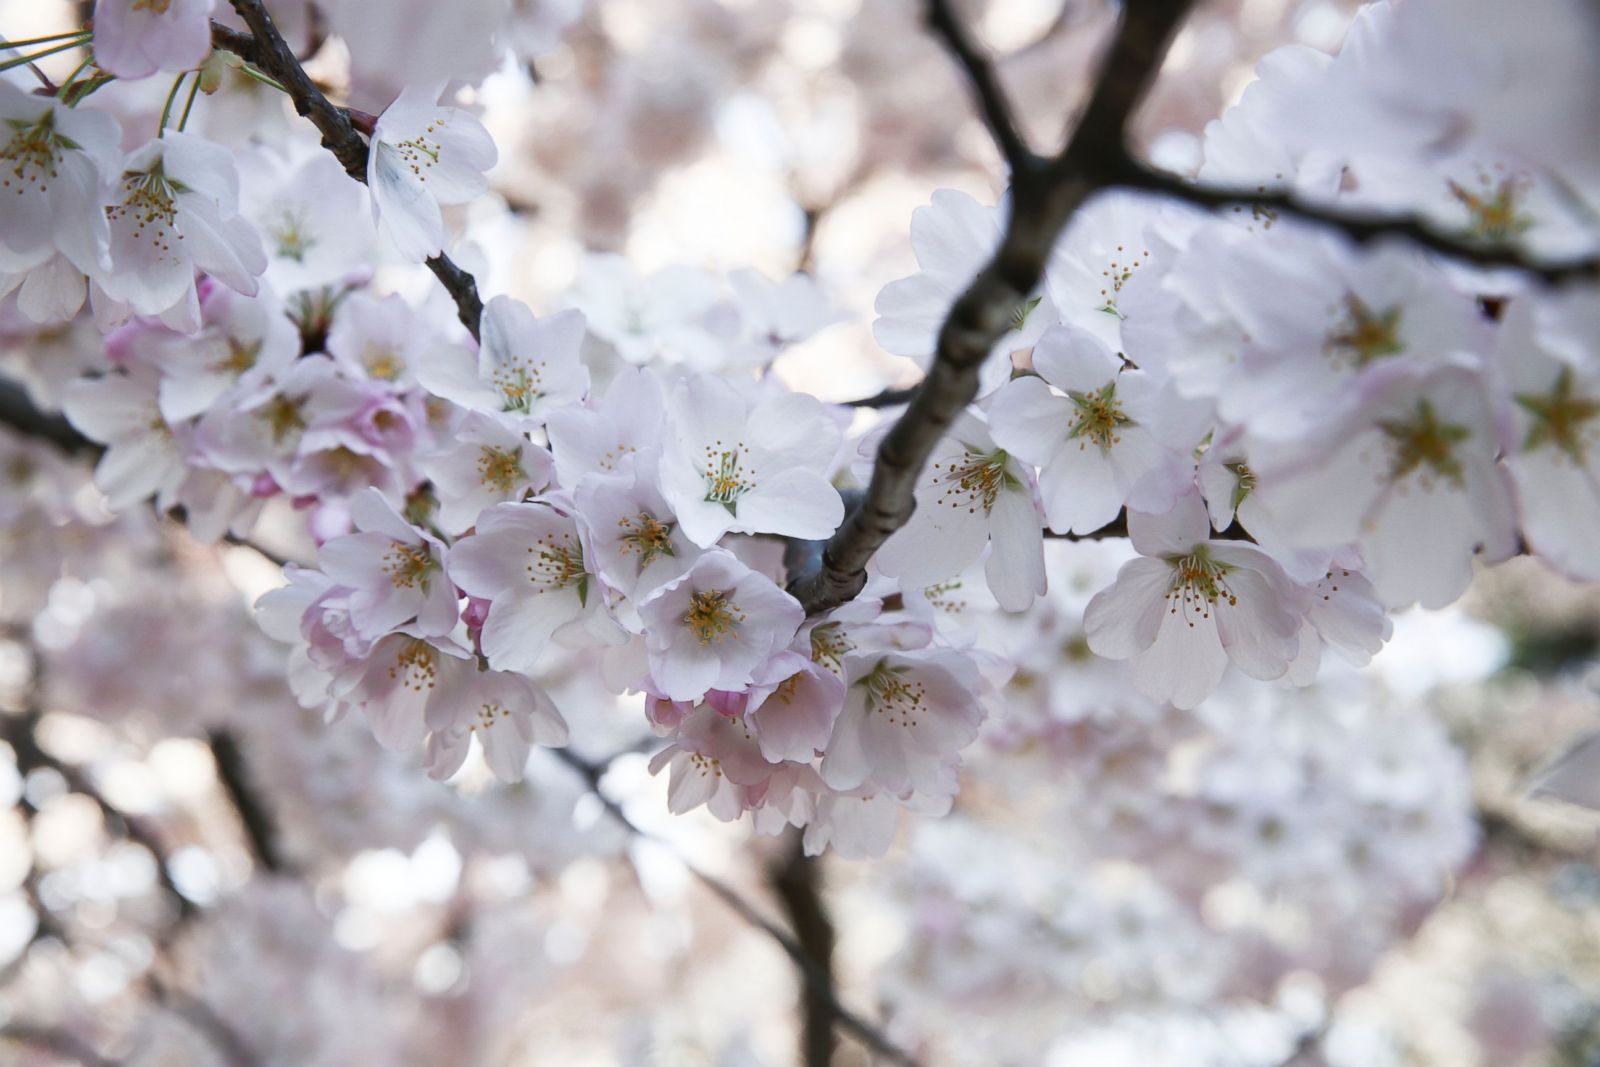 Cherry Blossom Trees Images - Corie Shandy